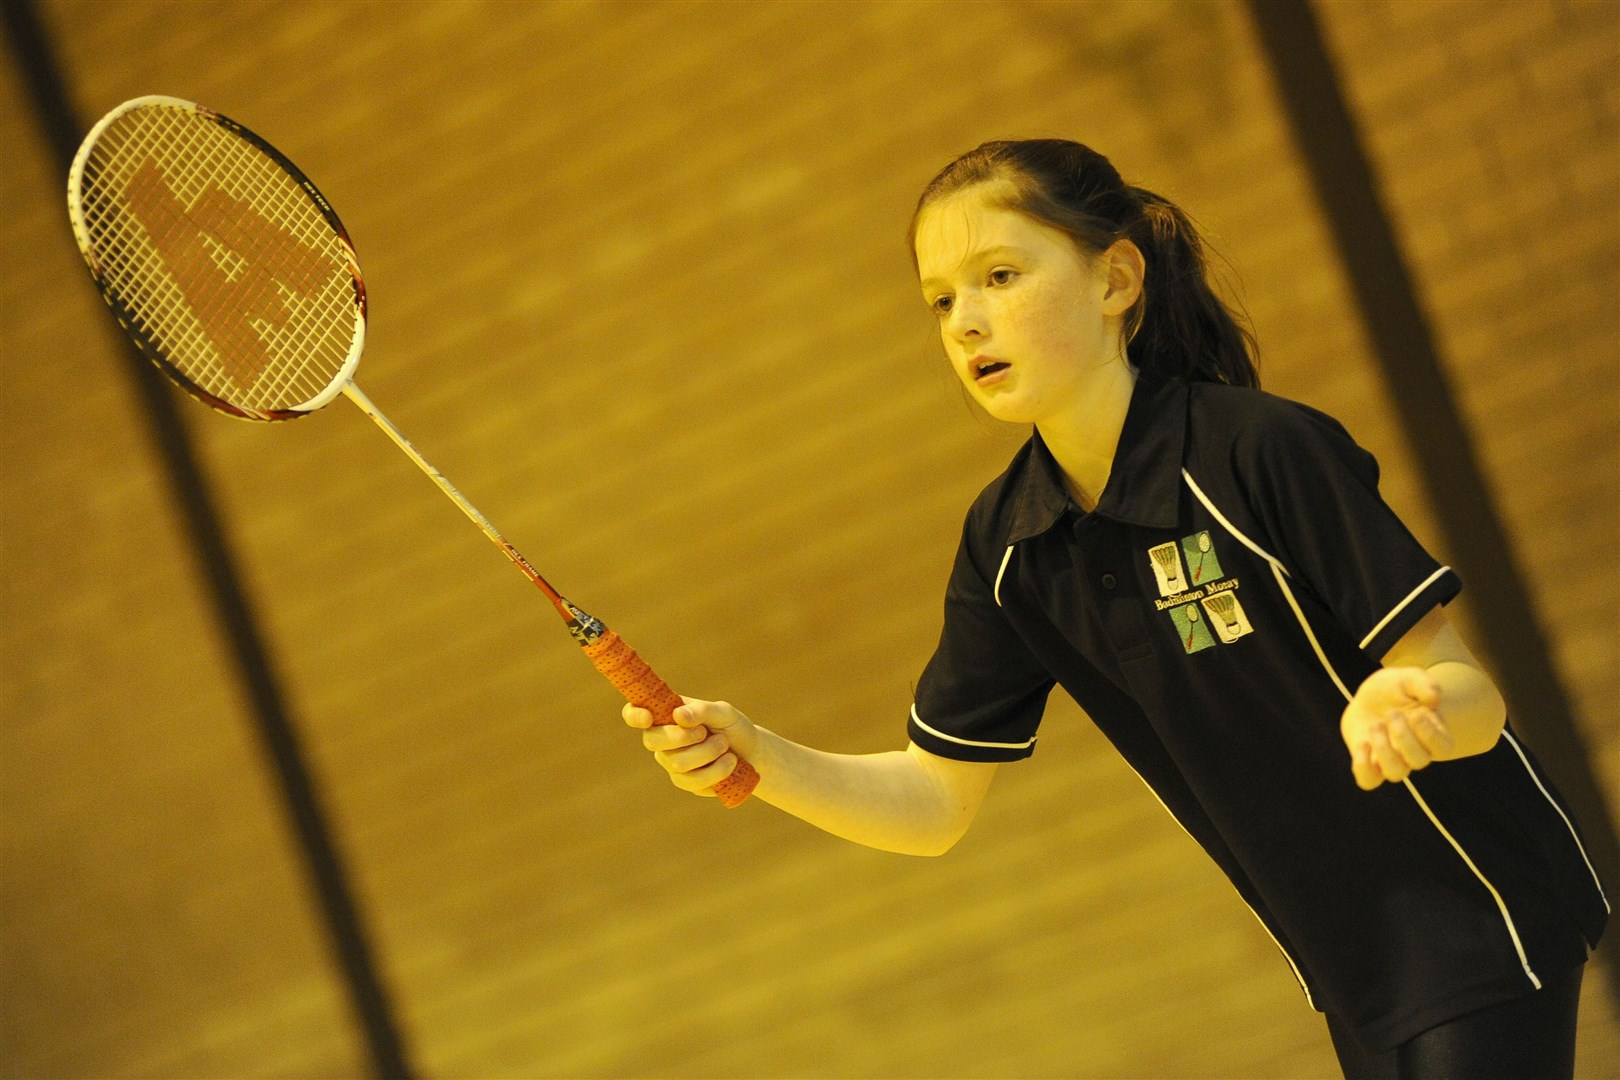 Badminton sessions are taking place in Alness. Picture: Daniel Forsyth